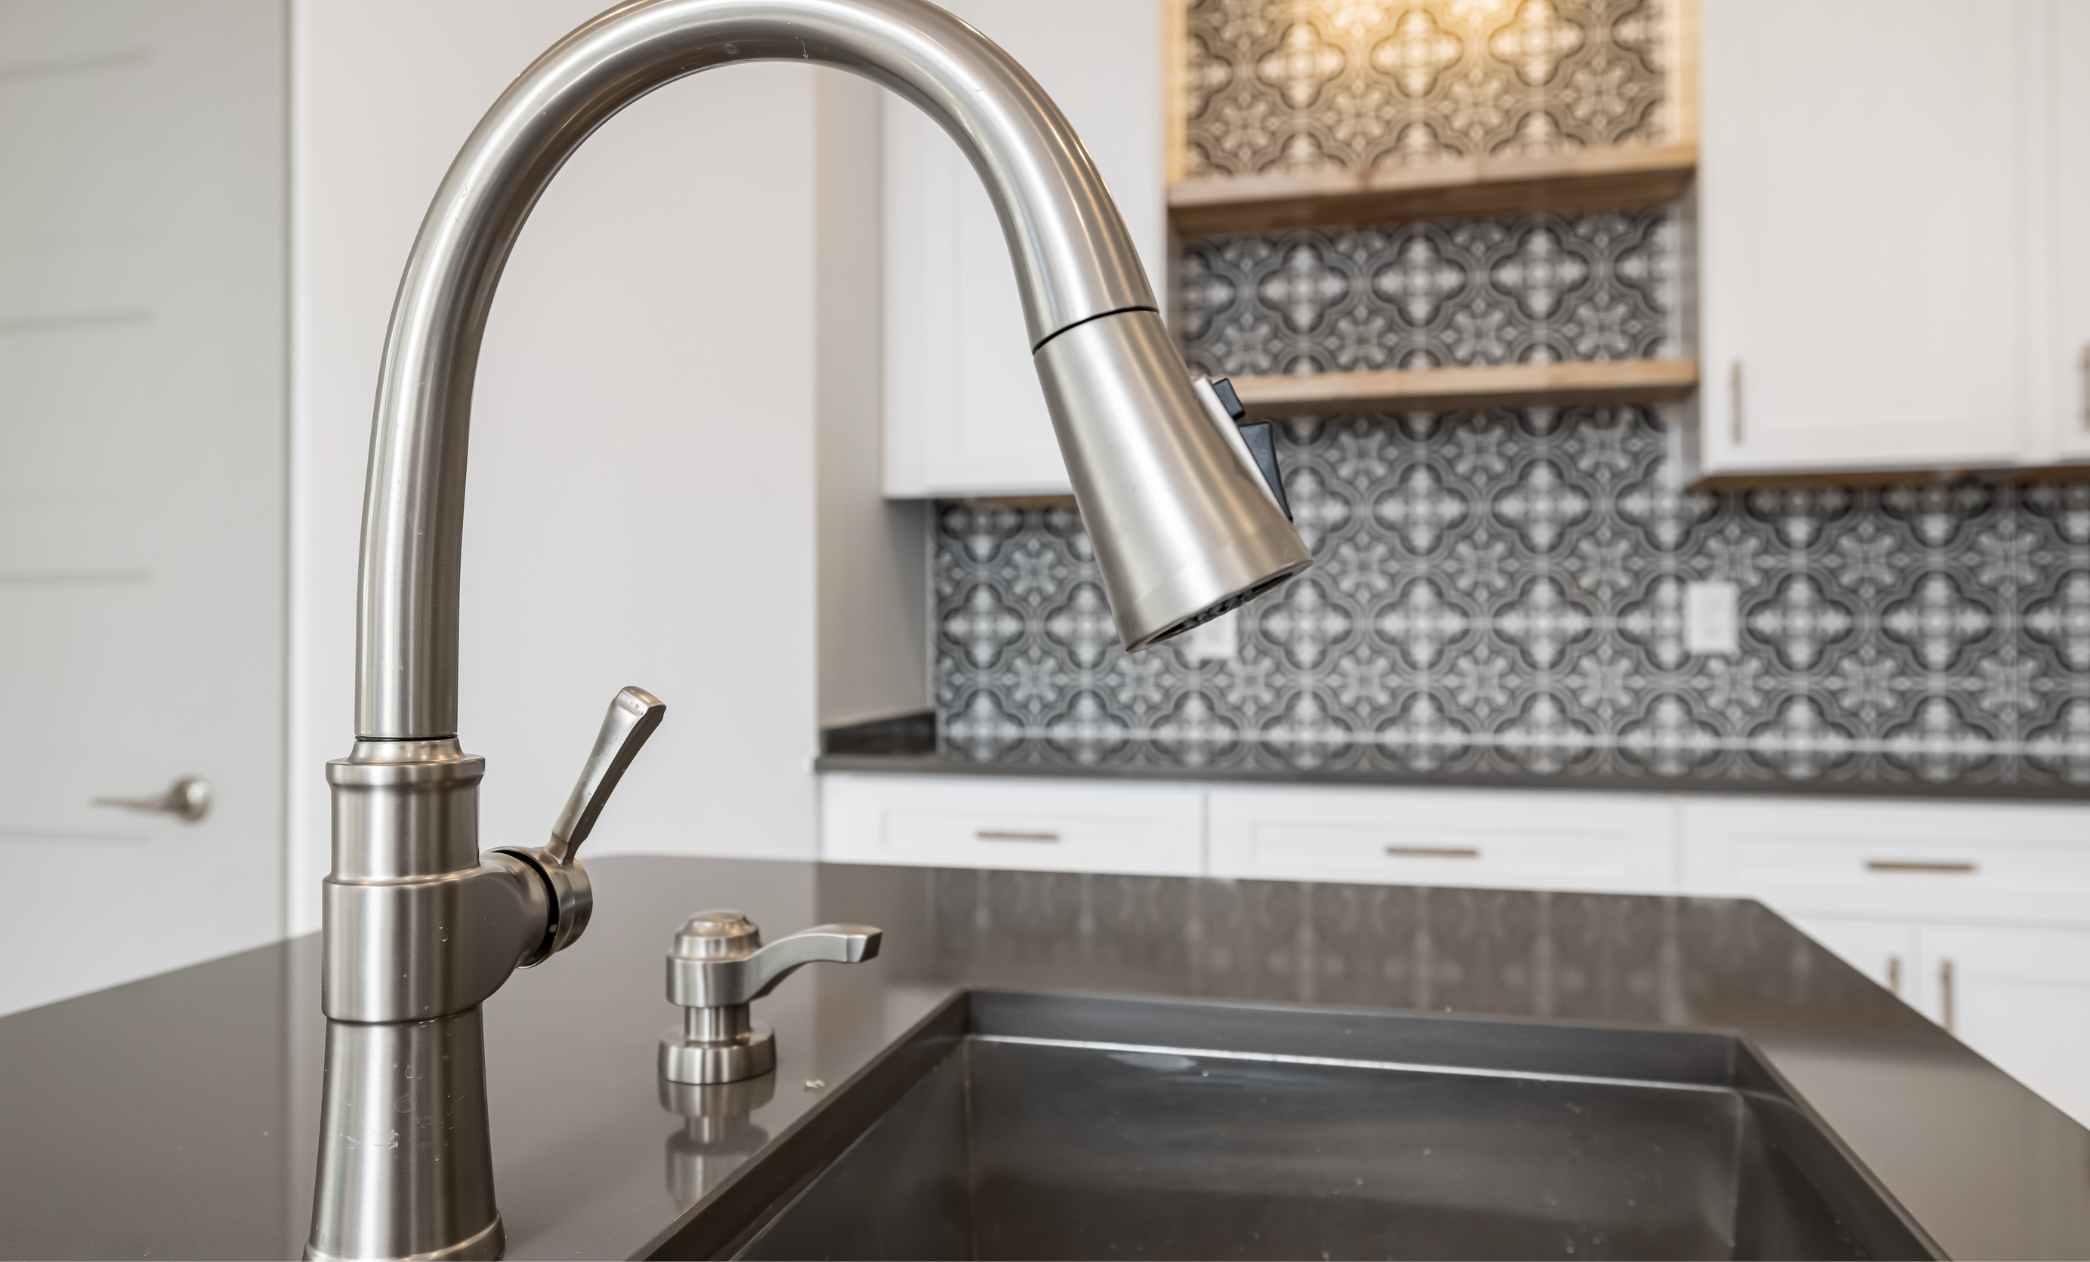  Upgrading Your Kitchen Faucet